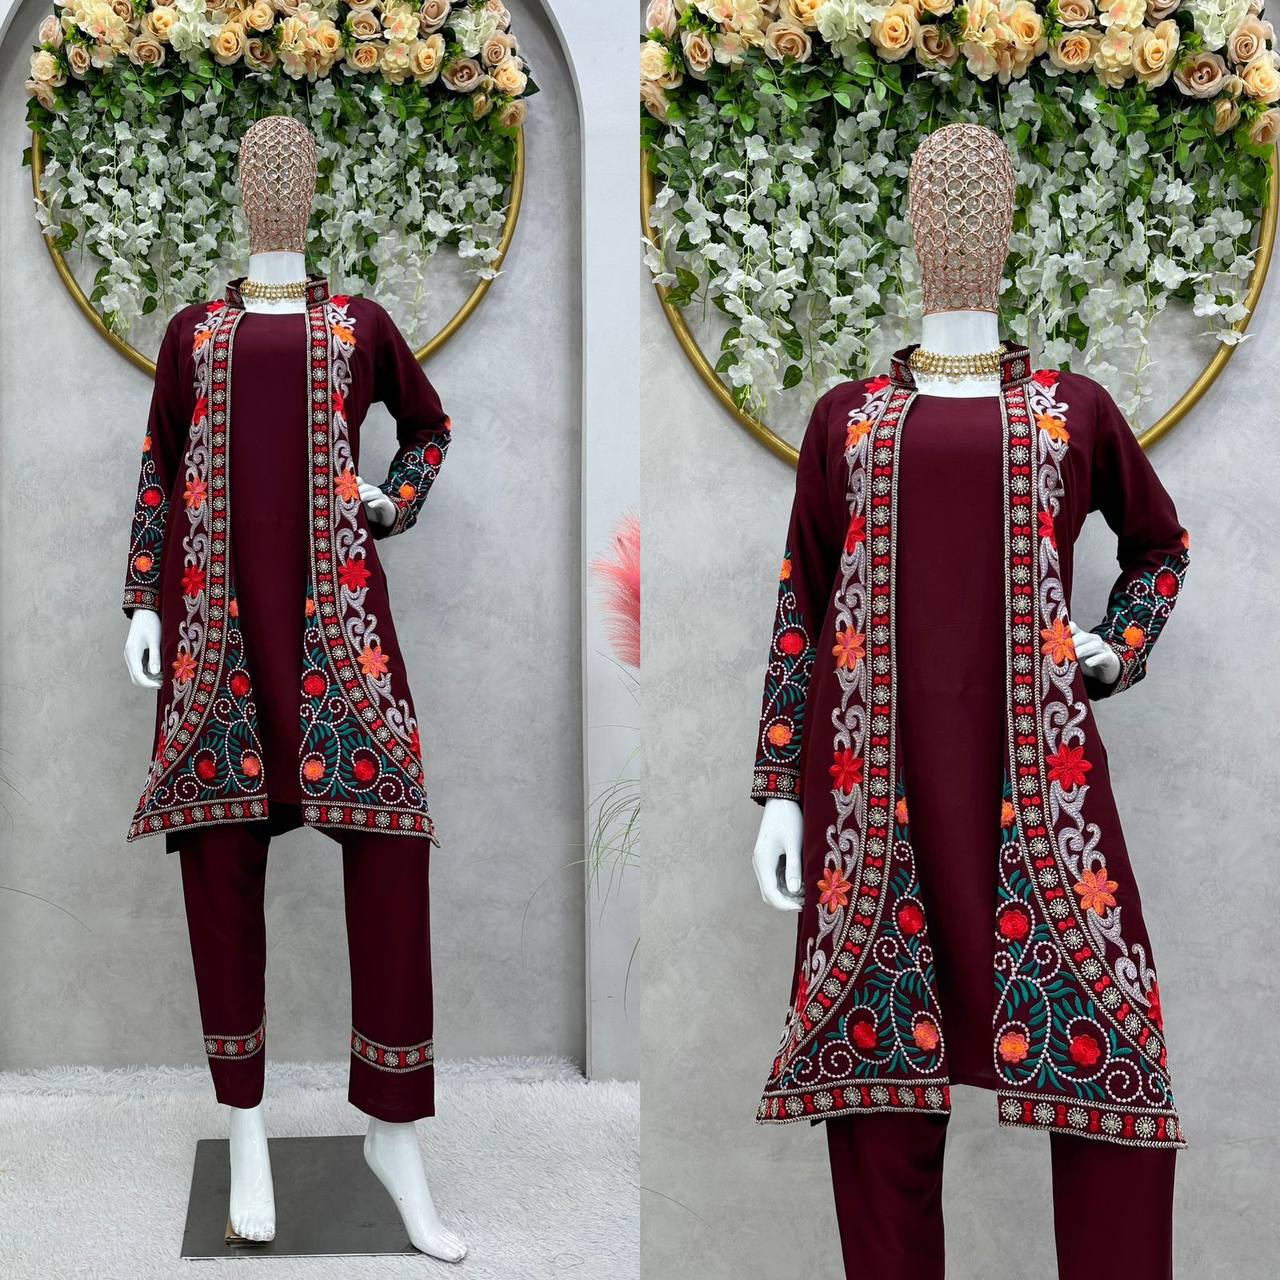 Looking for this same colour beautiful Designer Suit